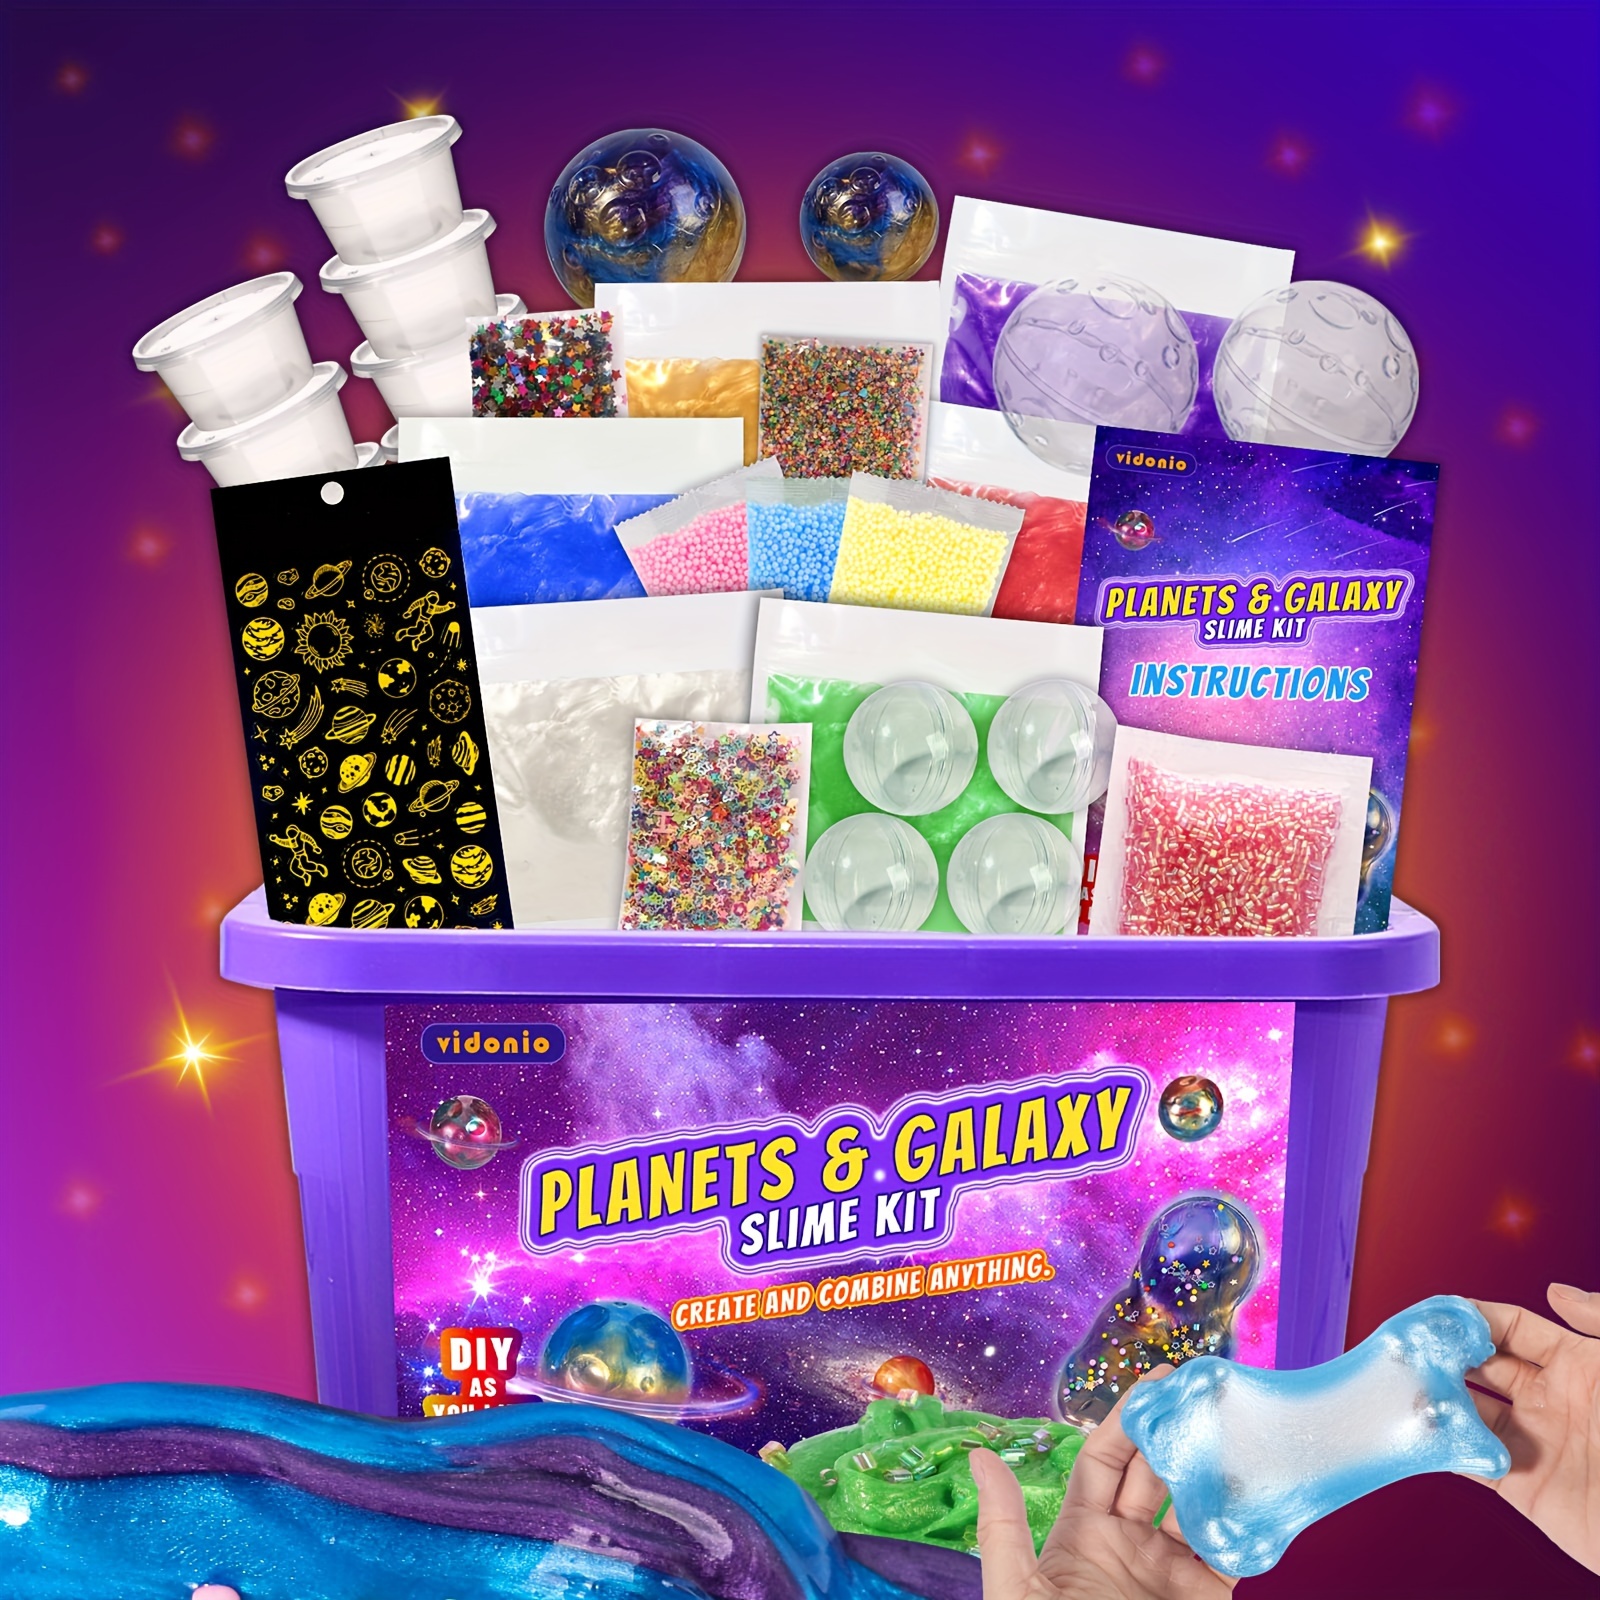 36 Packs Unicorn Slime Kit Unicorn Party Favors Galaxy Pretty Stretchy  Non-Sticky Slime pack for Girls & Boys Goodie Bag Stuffer - AliExpress